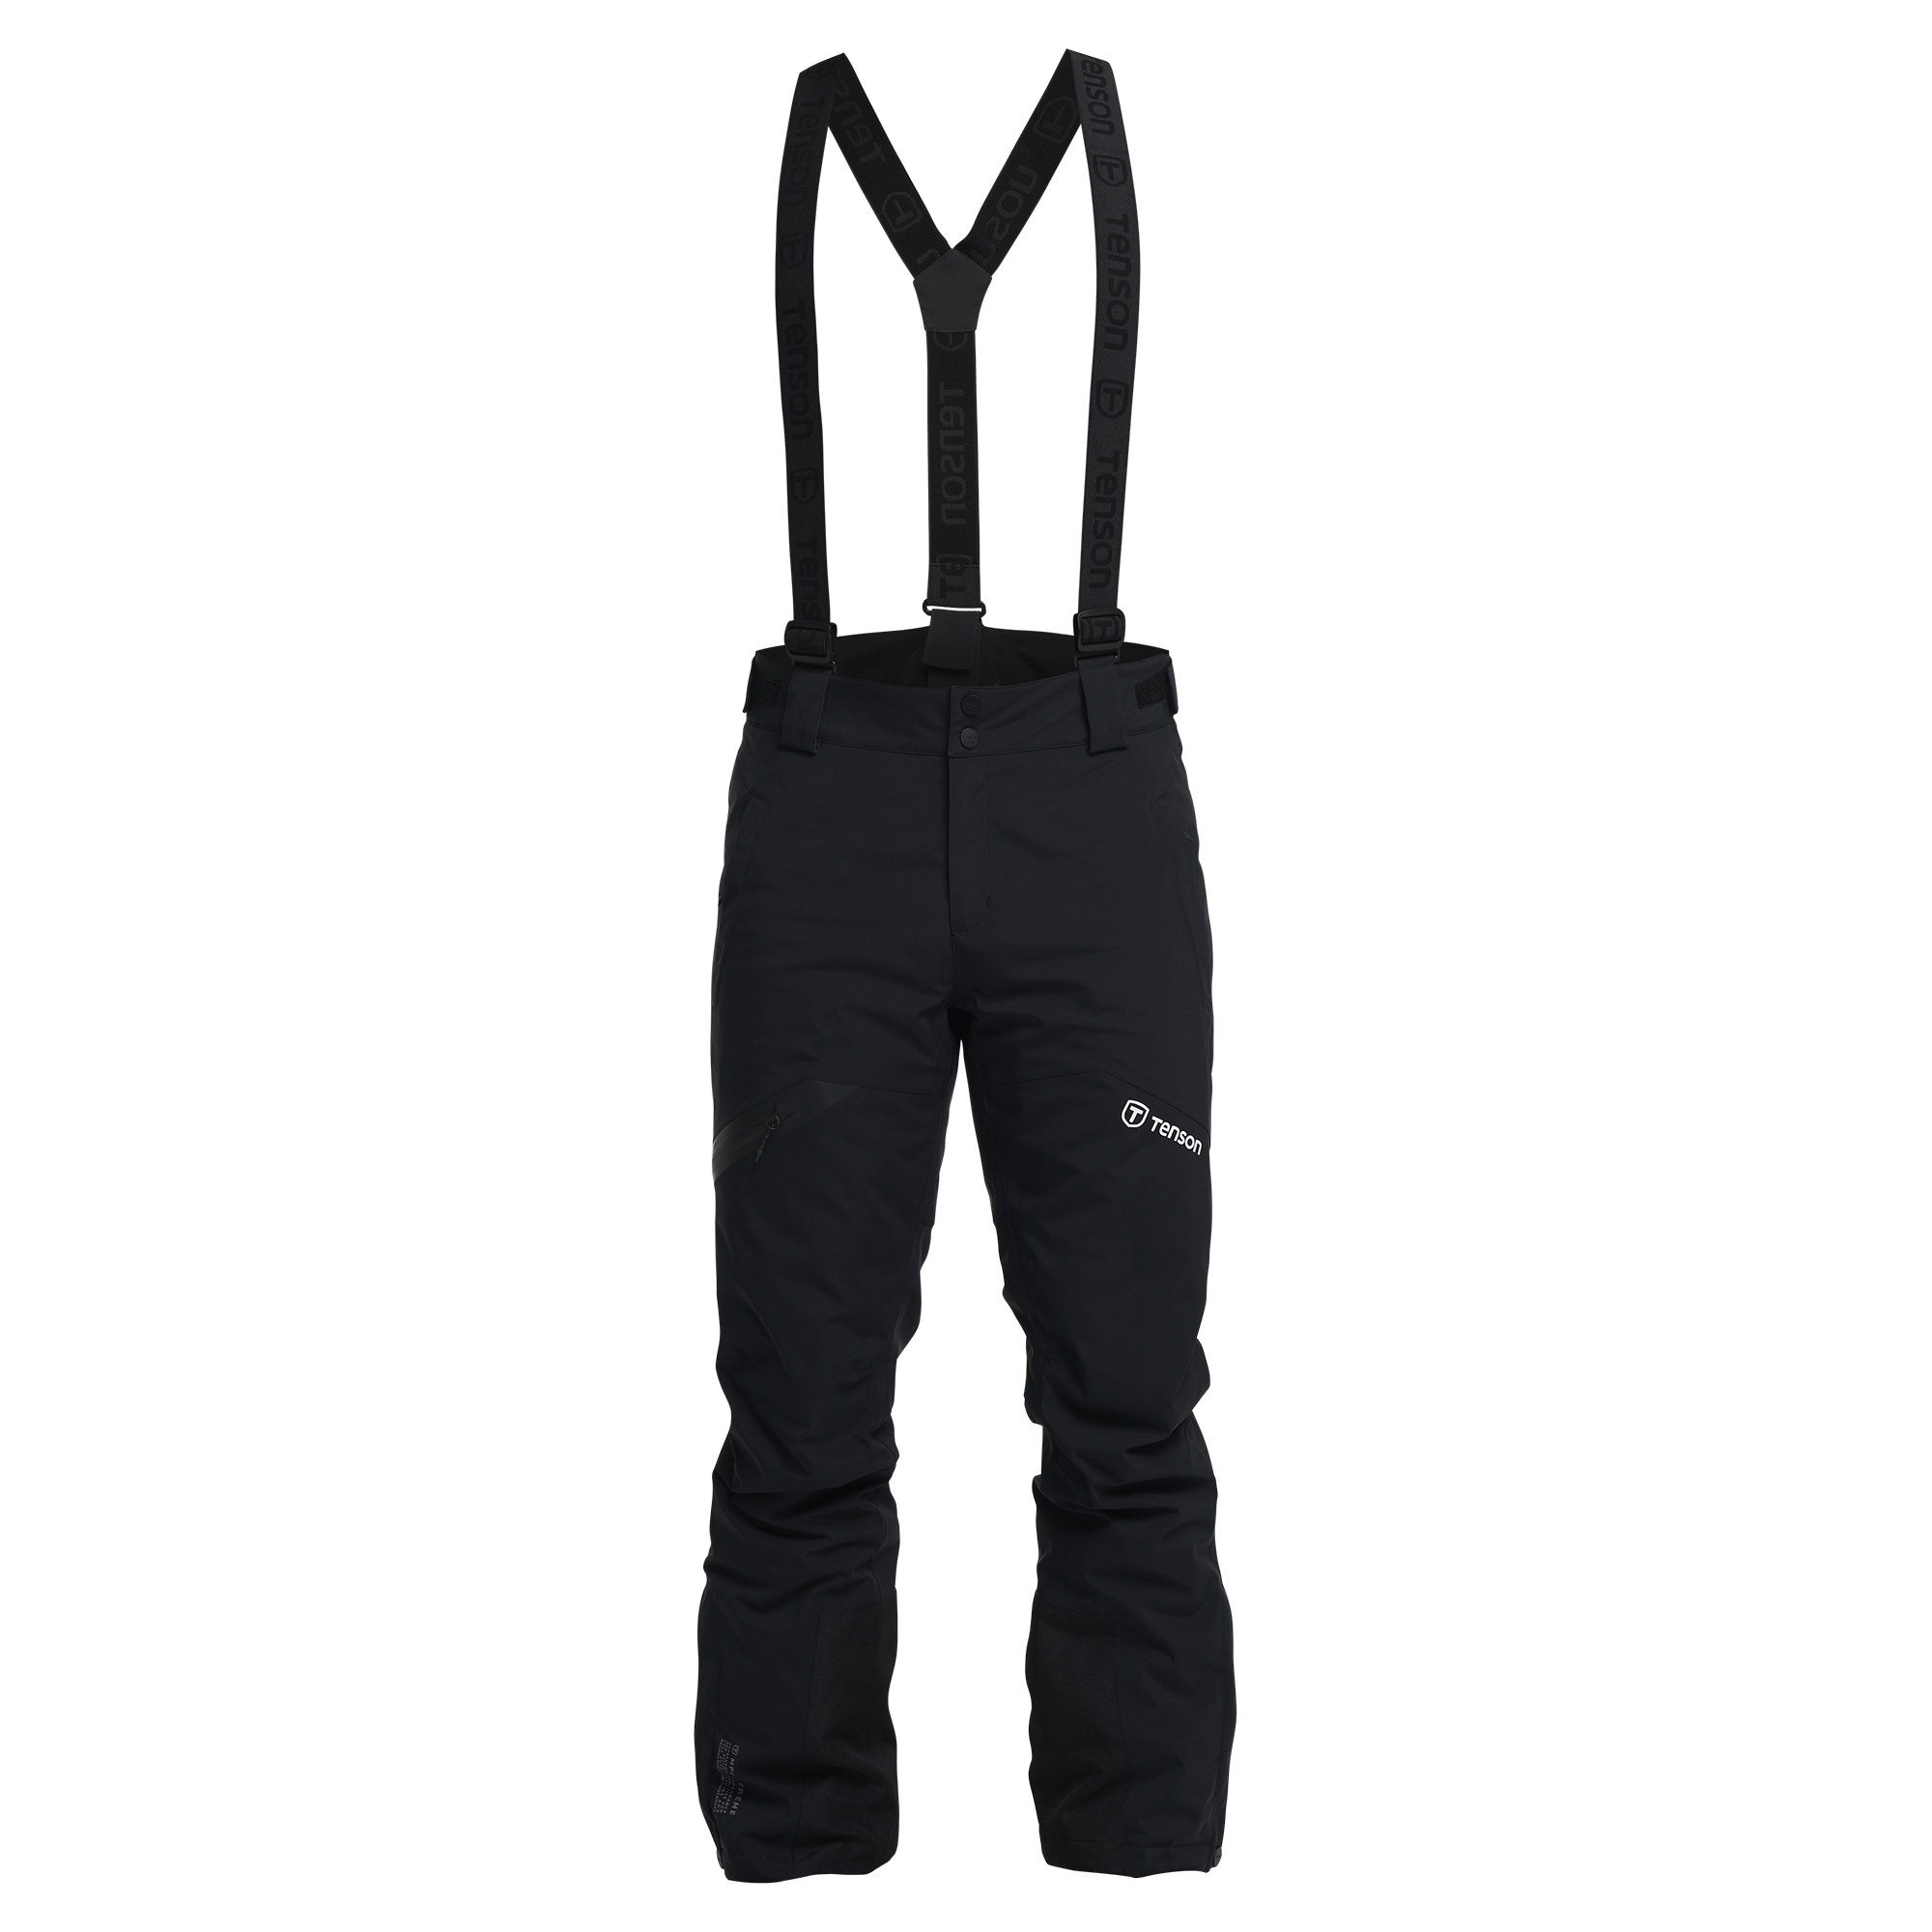 Ski trousers for women, snow trousers with braces, thermal outdoor trousers,  braces, waterproof, windproof, softshell trousers, warm lined, snowboard  trousers, hiking trousers, winter ski pants, : Amazon.co.uk: Fashion